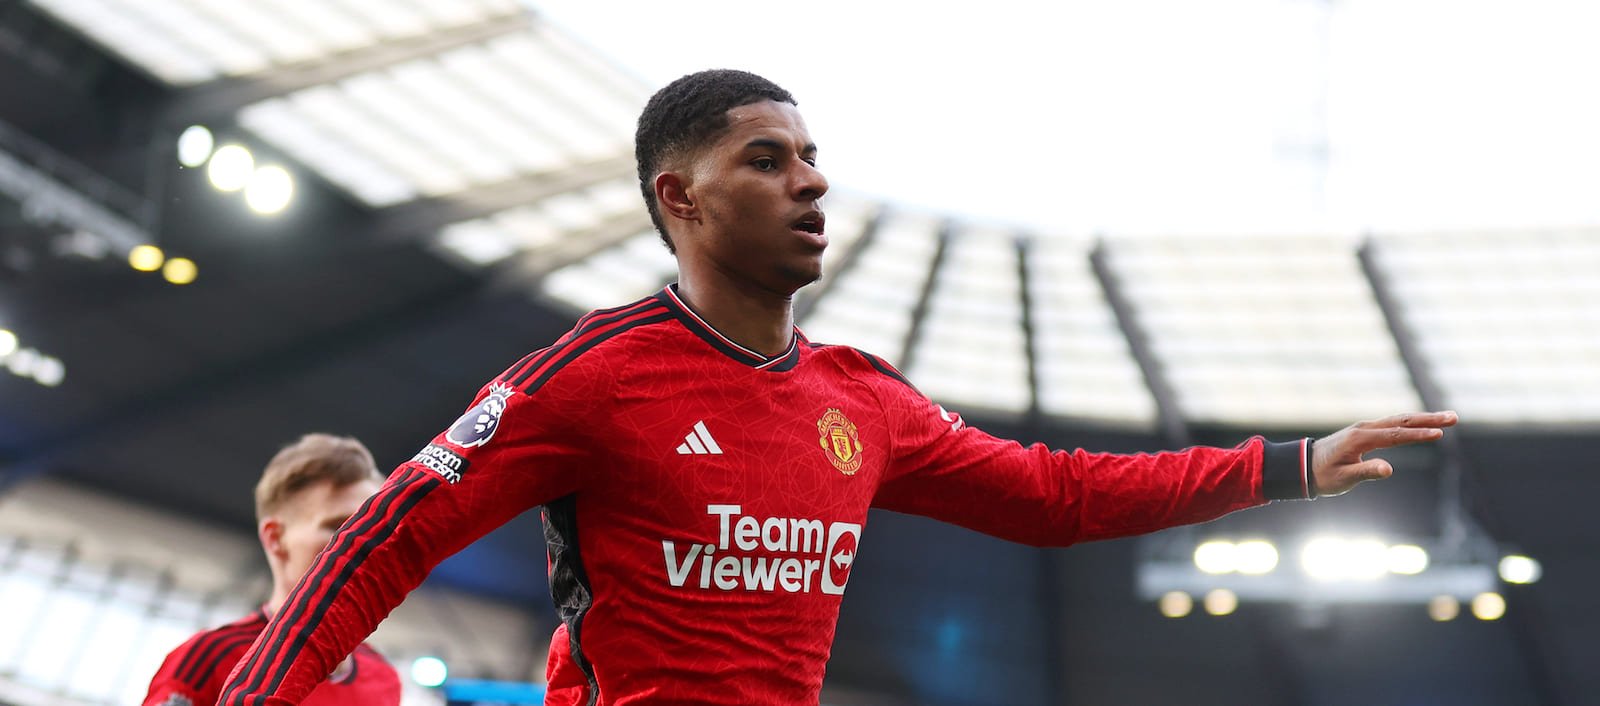 Mikael Silvestre believes Marcus Rashford would thrive in Ligue 1 but expects forward to stay at Old Trafford – Man United News And Transfer News